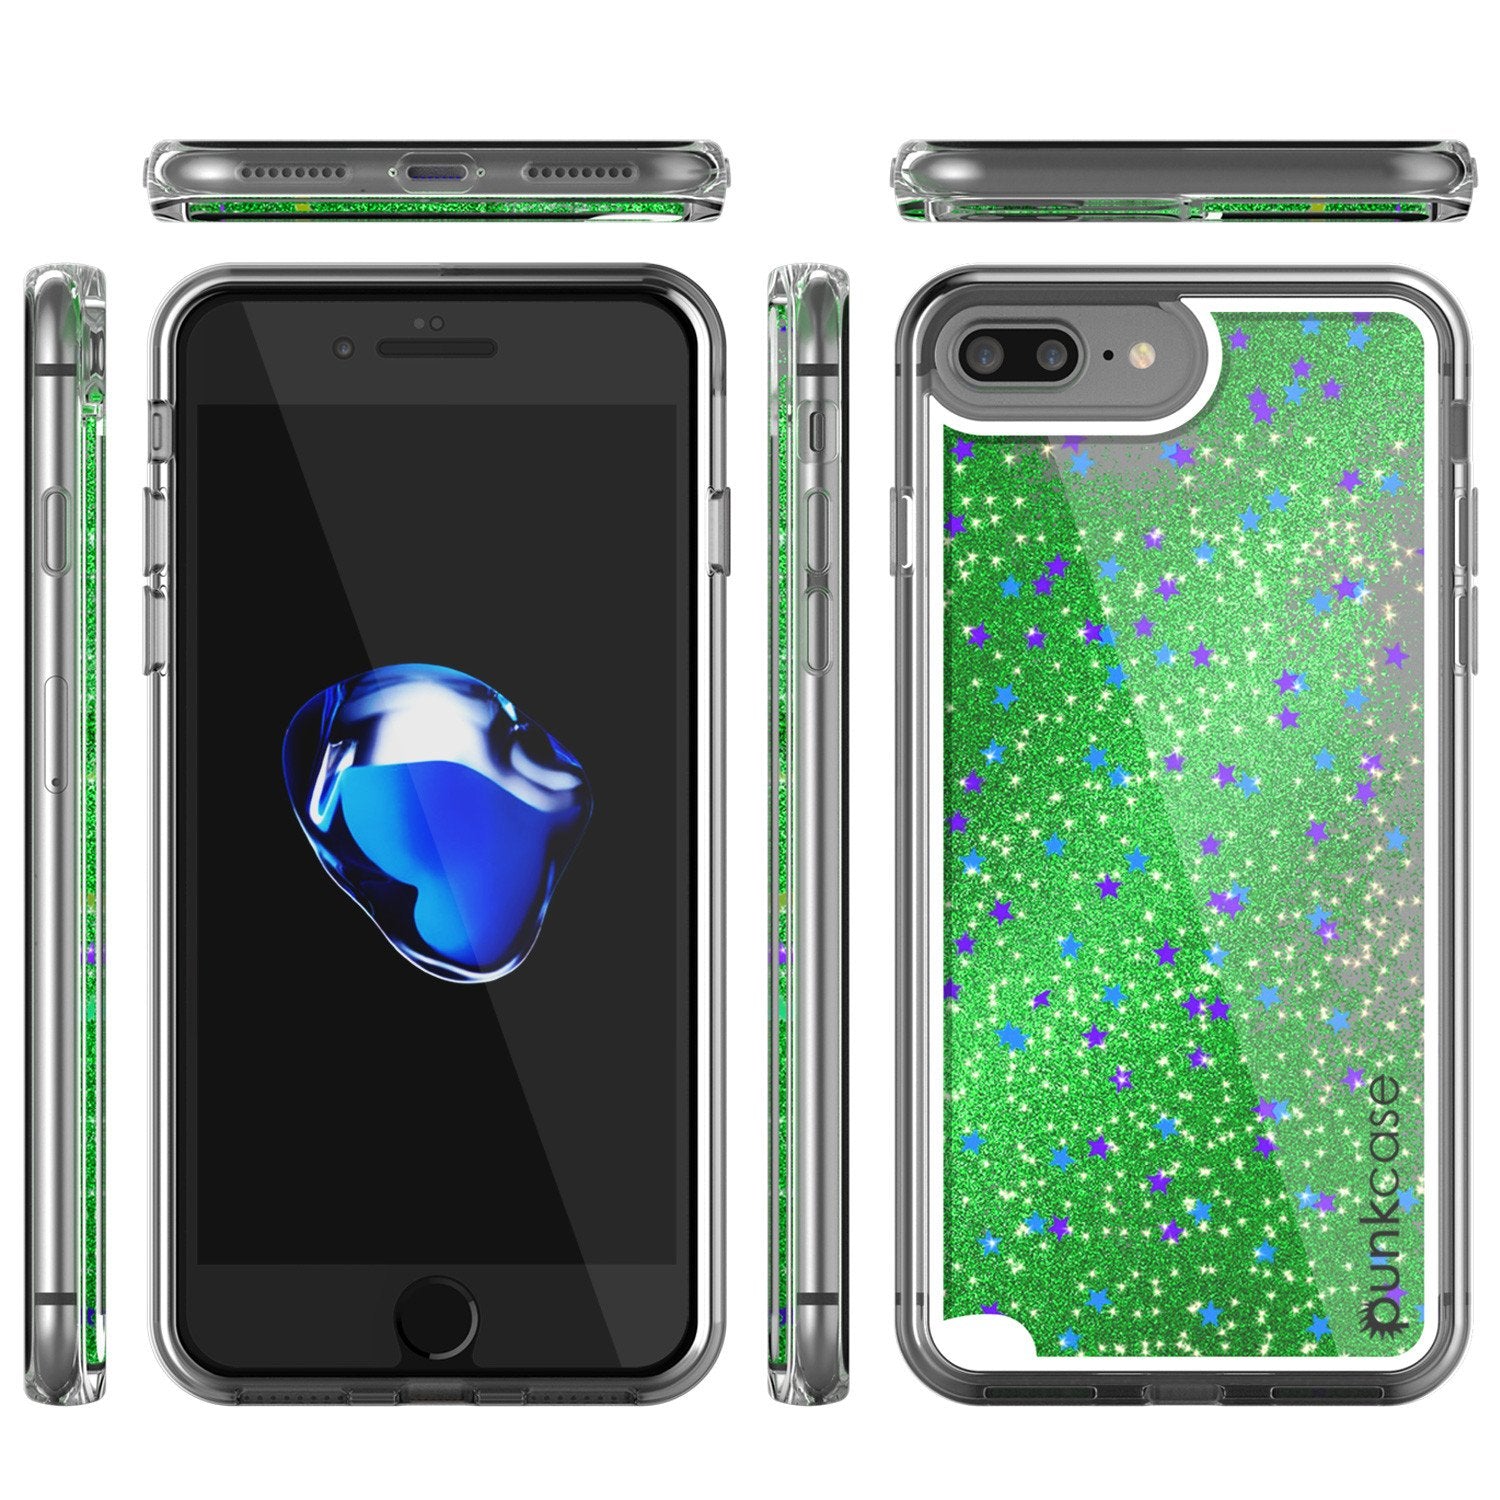 iPhone 7 Plus Case, PunkCase LIQUID Green Series, Protective Dual Layer Floating Glitter Cover